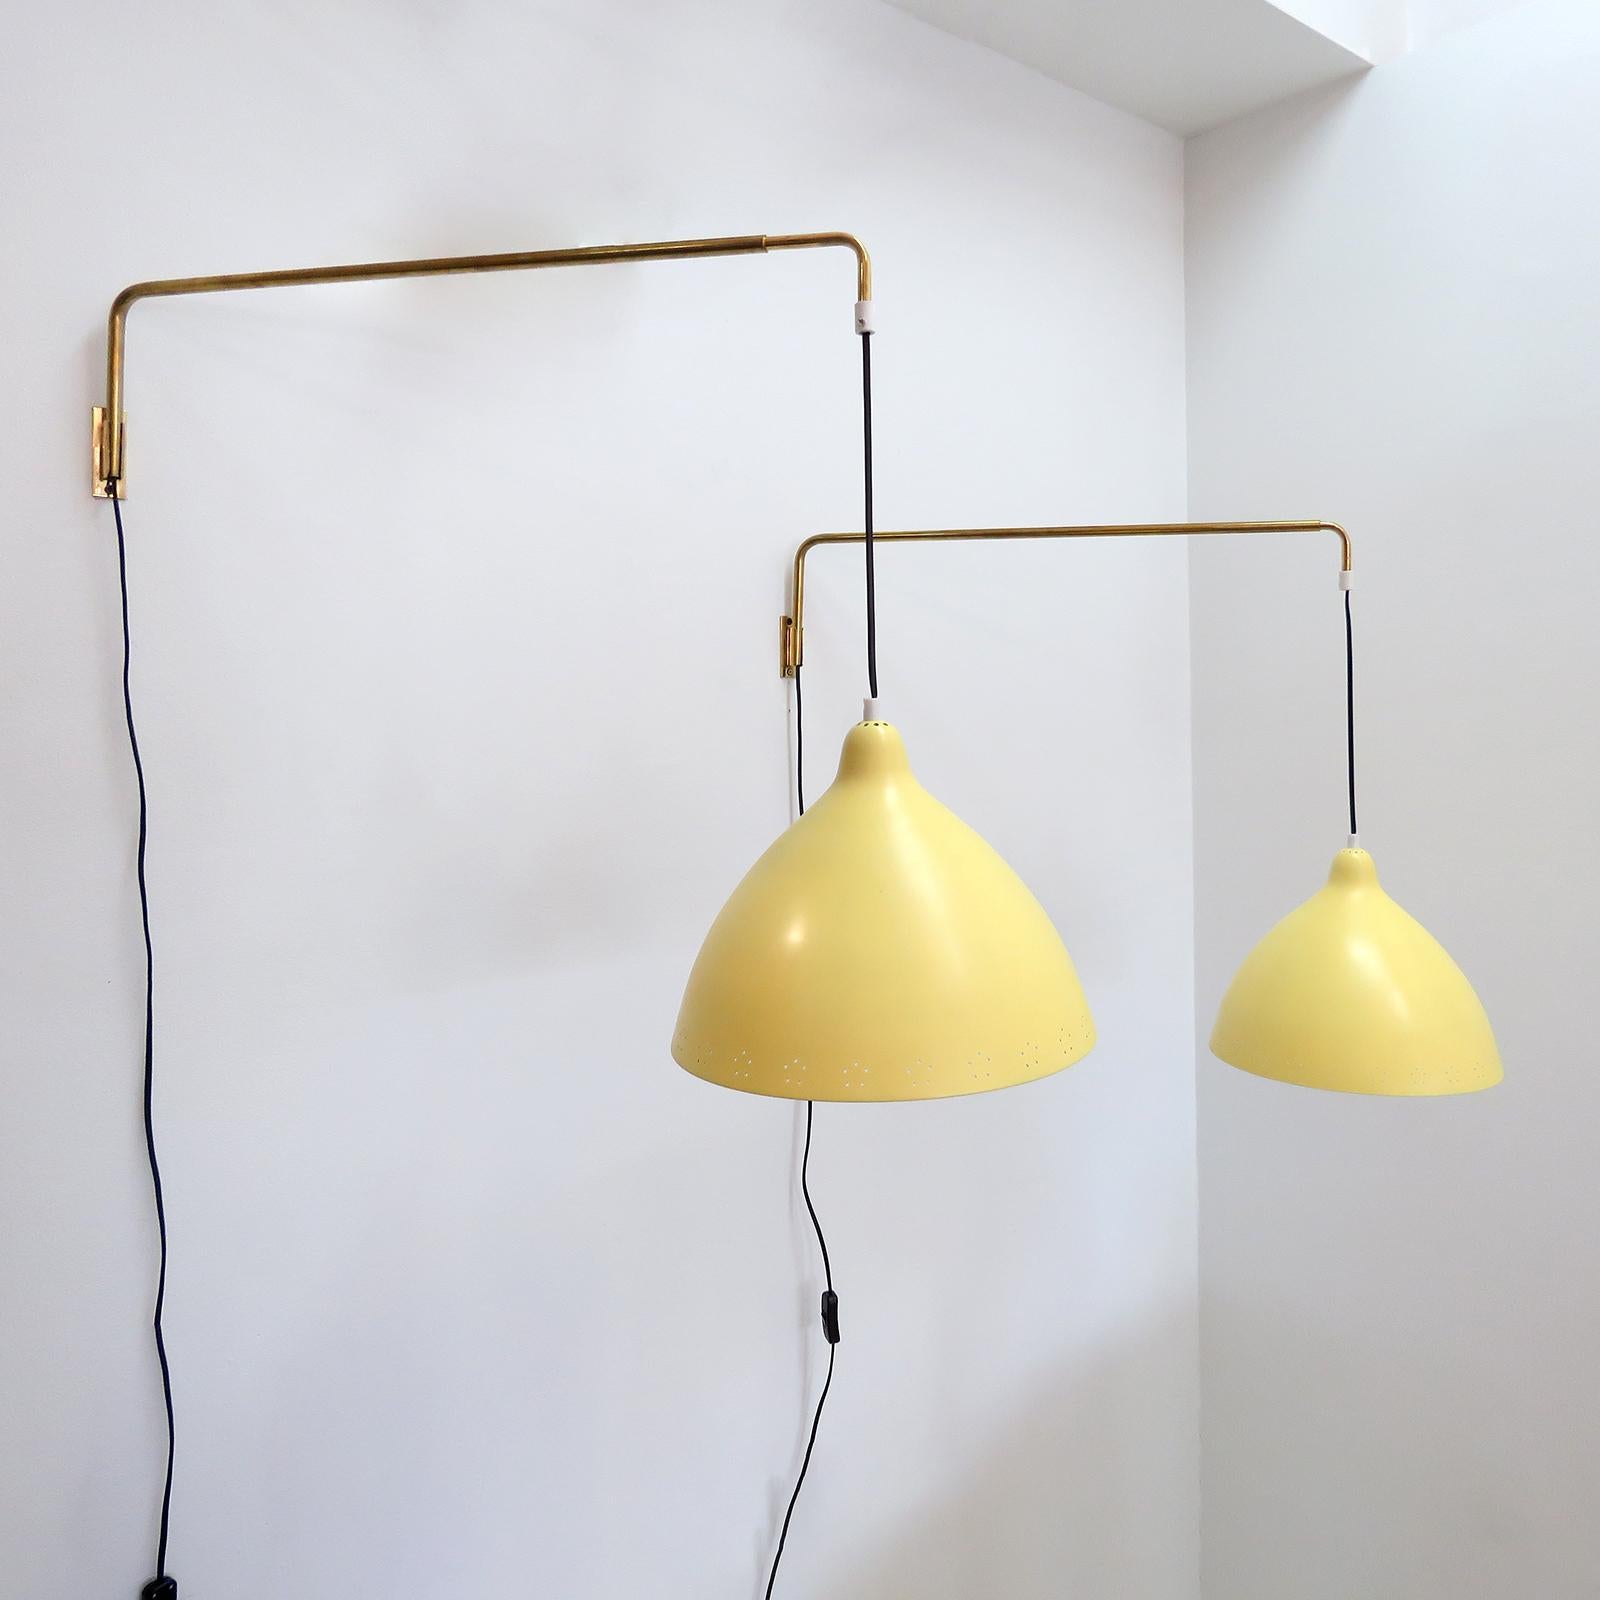 Painted Swing Arm Wall Lights by Lisa Johansson-Pape for Orno, 1960 For Sale